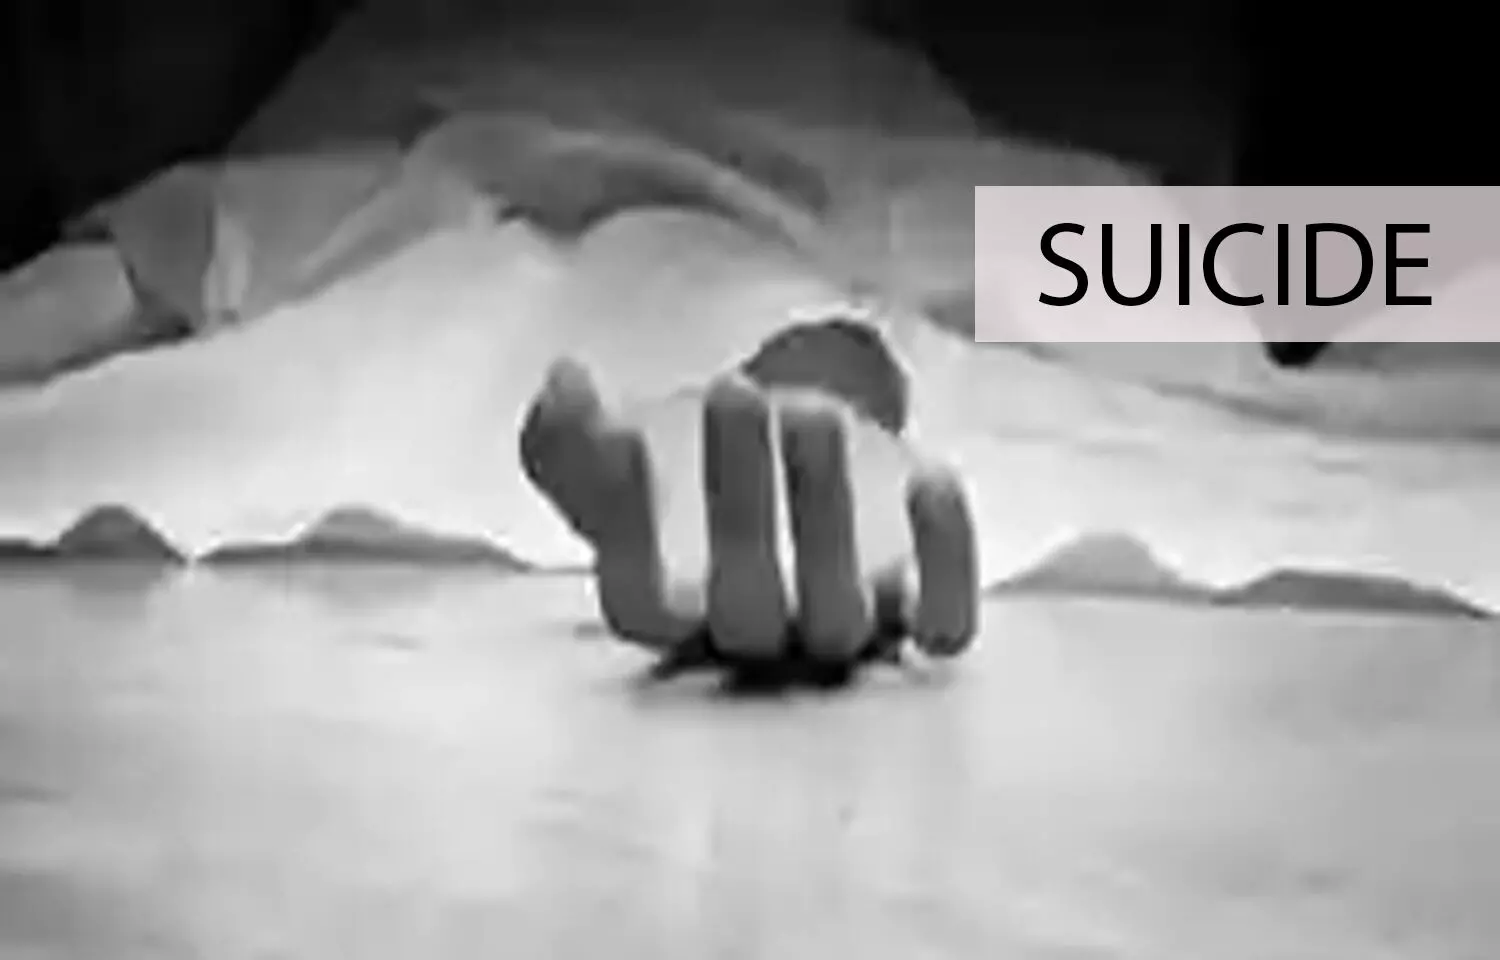 BAMS doctor couple allegedly commits suicide over dispute